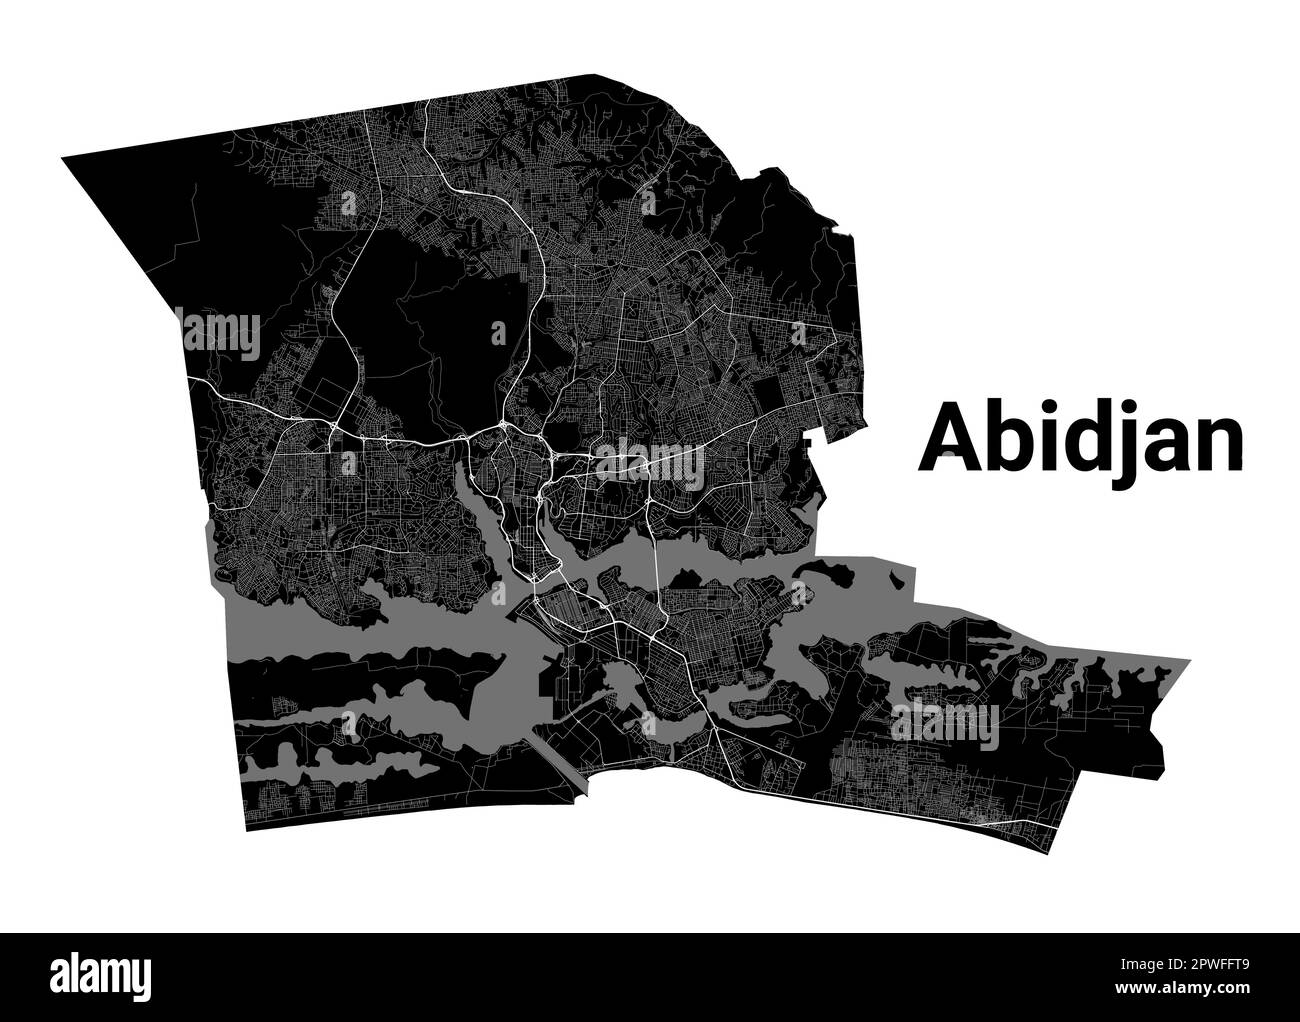 Abidjan, Cote d'Ivoire map. Detailed black map of Abidjan city administrative area. Cityscape poster metropolitan aria view. Black land with white roa Stock Vector